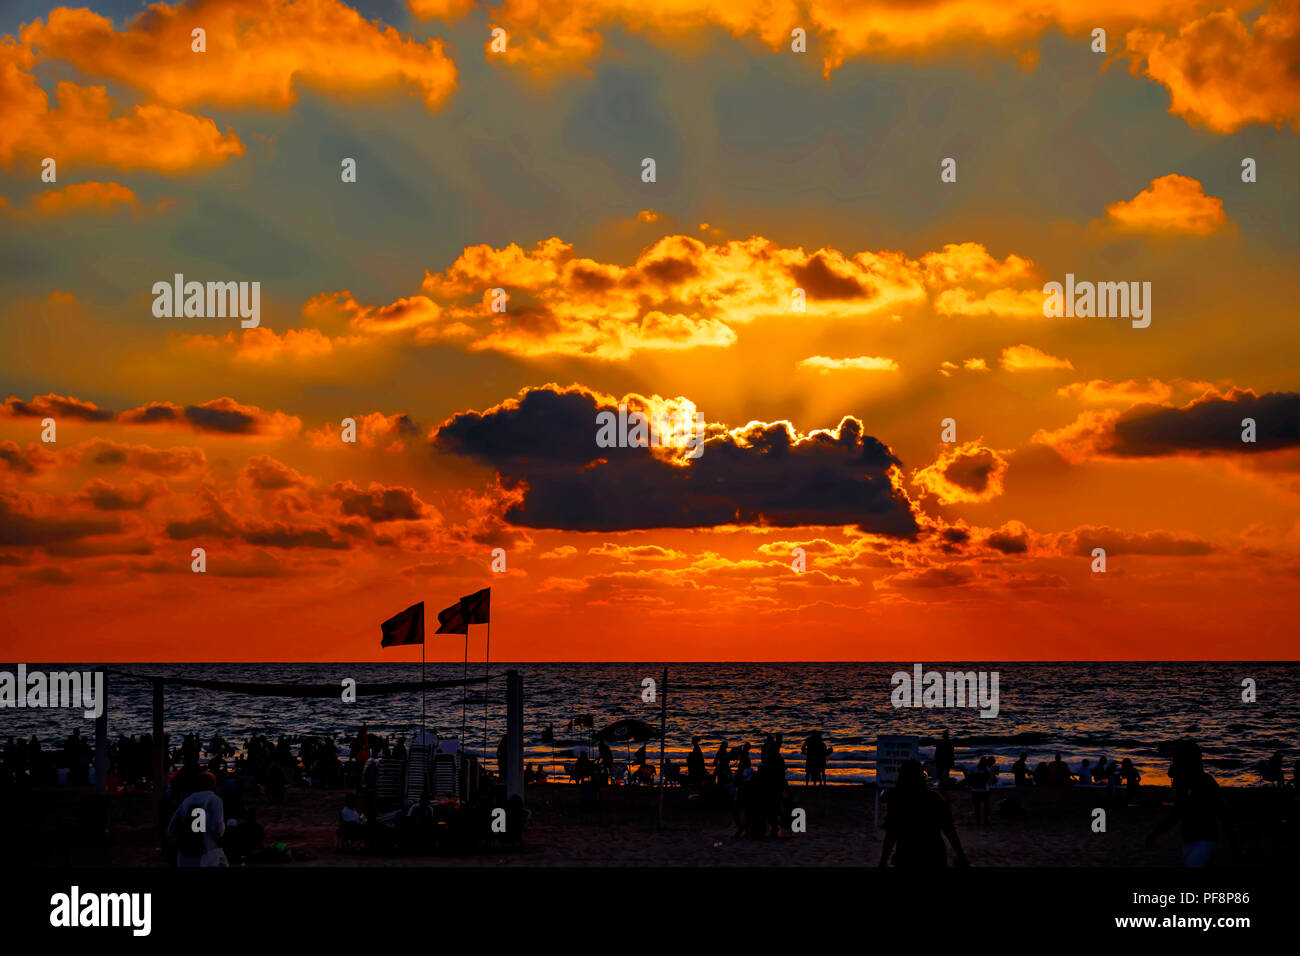 People on the beach during sunset on the Mediterranean Sea Stock Photo